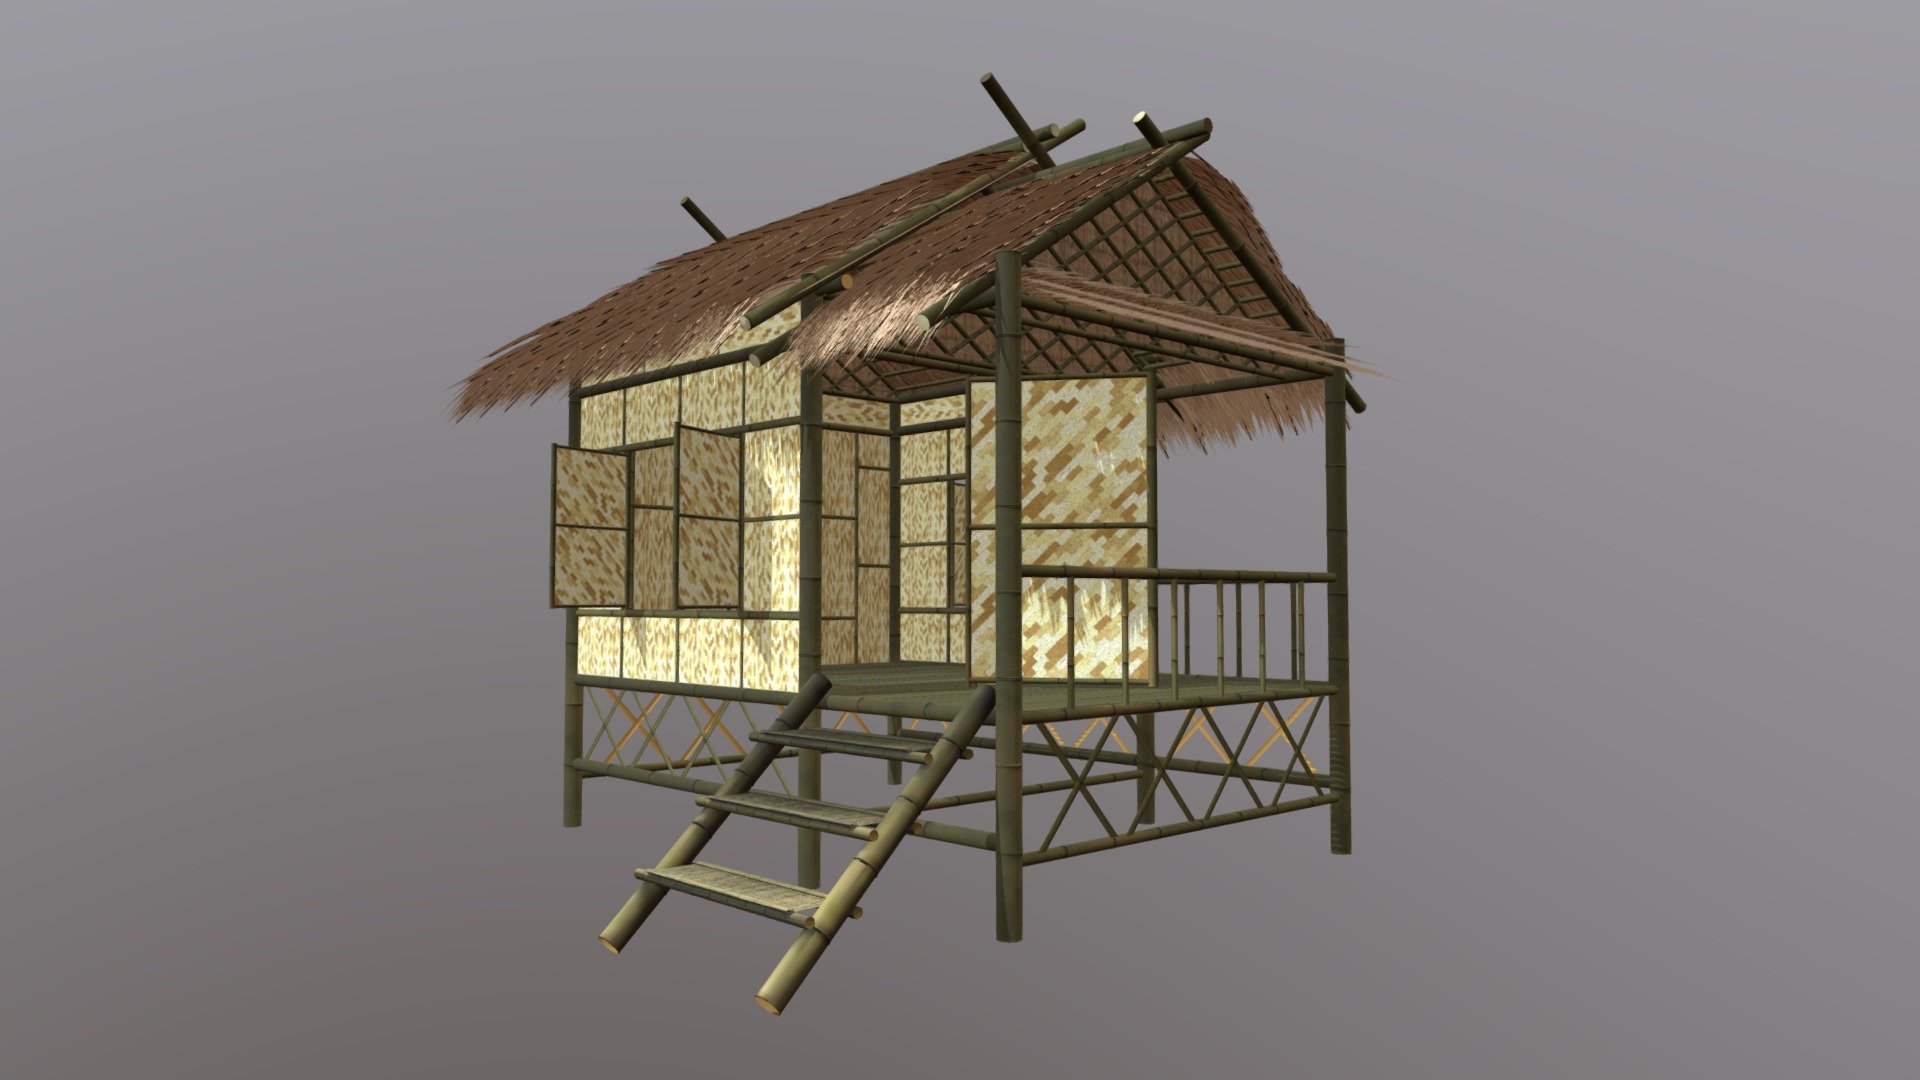 3d thai house made of bamboo Take the model from a real house in the countryside of Thailand. or as a vacation home for tourists - Thai Bamboo House - 3D model by kapraokaisub 3d model